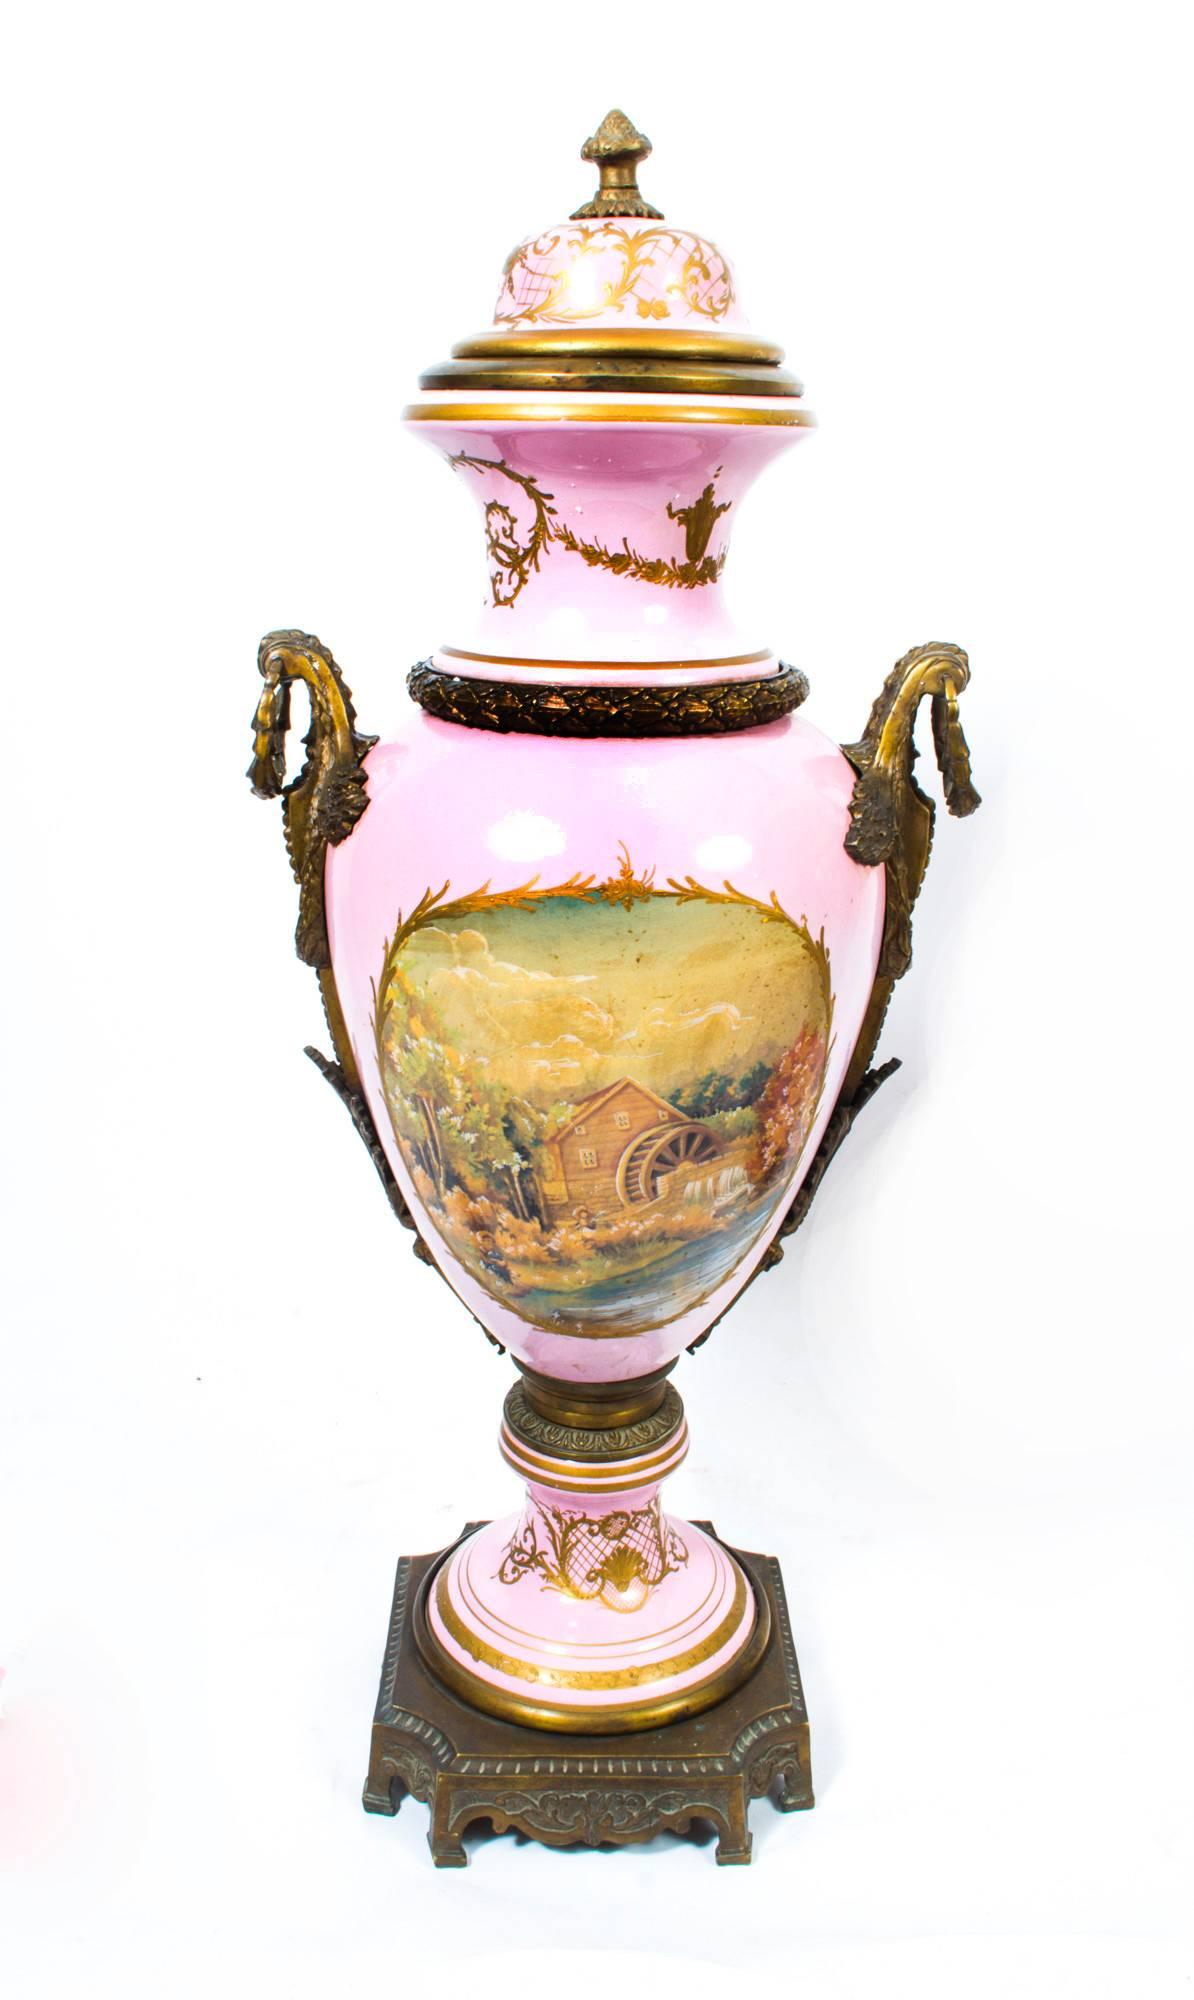 This is a large and stunning pair of Sevres style hand painted porcelain vases with fabulous ormolu mounts. 

The vases are a beautiful ‘rose pink’ in colour and have fabulous hand painted decoration as well as striking gilded highlights.